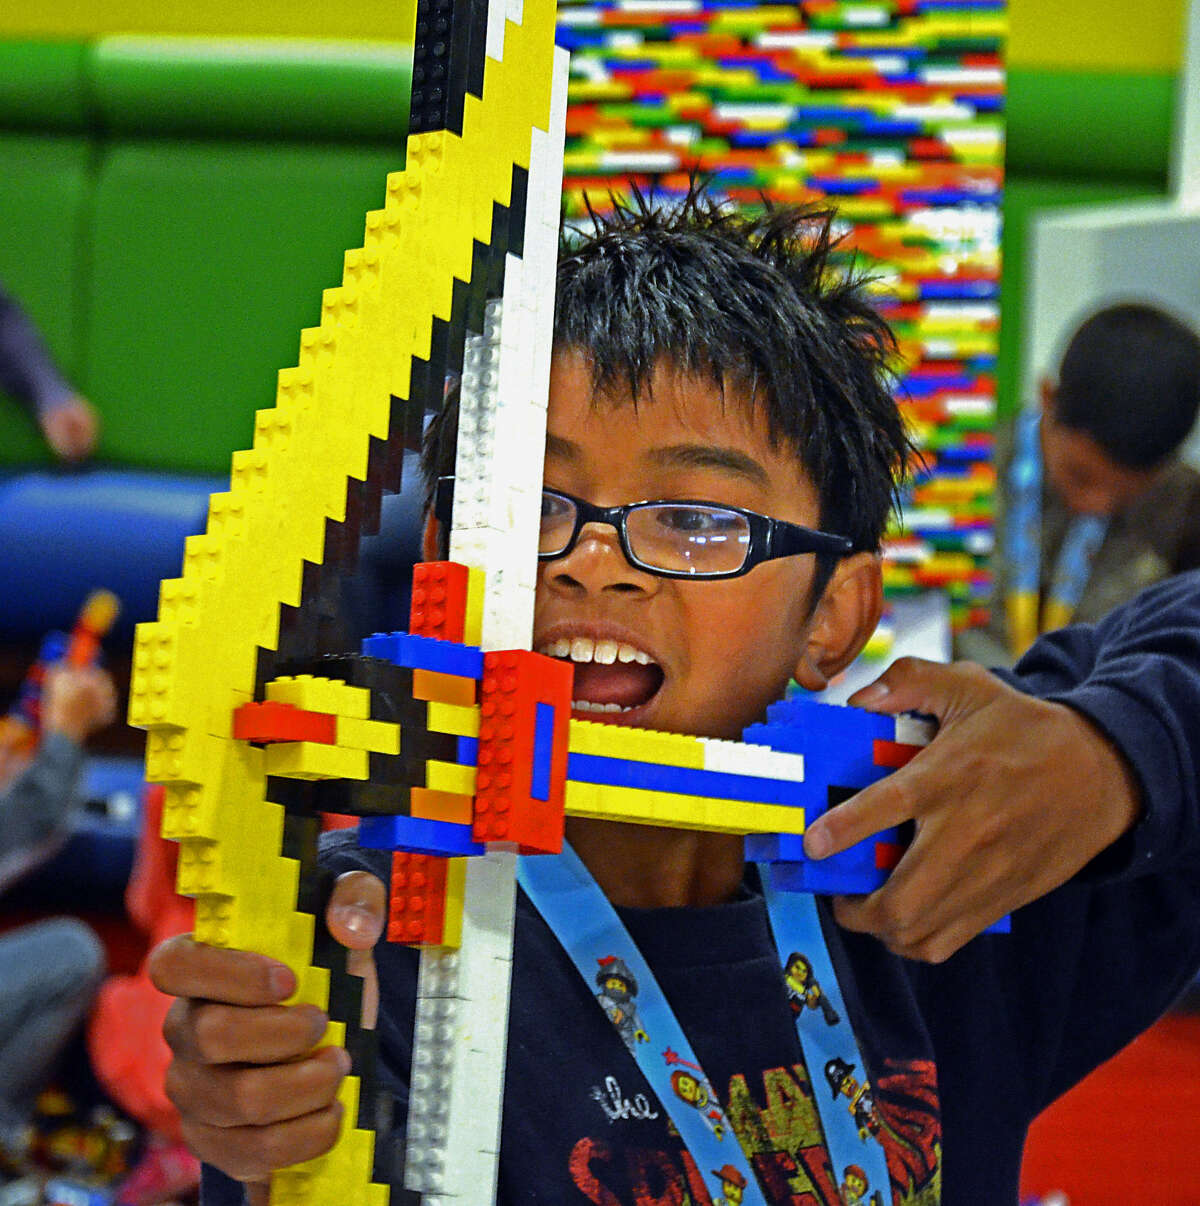 Mason Eugenio, 11, plays with a bow he made from Lego pieces. Legos are the No. 1 toy sought by boys.